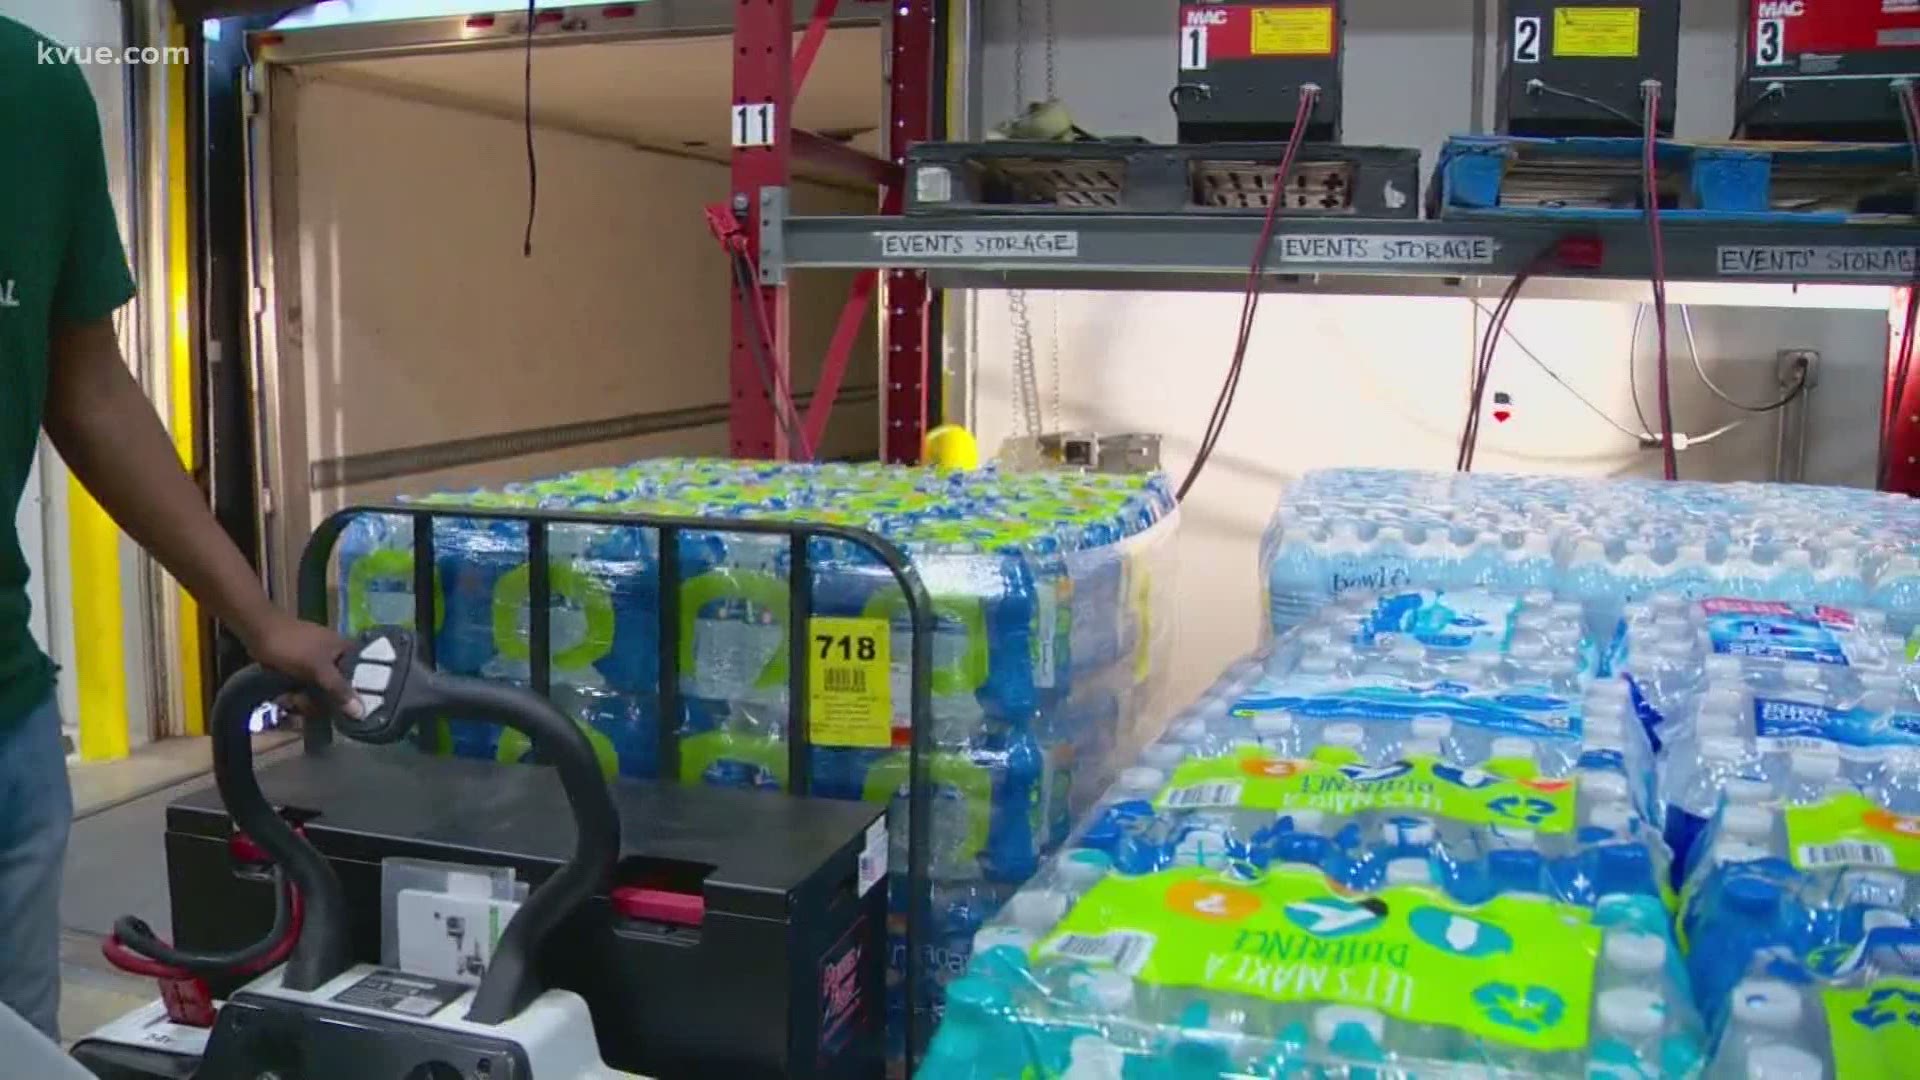 A small Pennsylvania town is lending a hand to Texans in need. City leaders from Collingdale were in Austin Monday to donate more than 58,000 bottles of water.